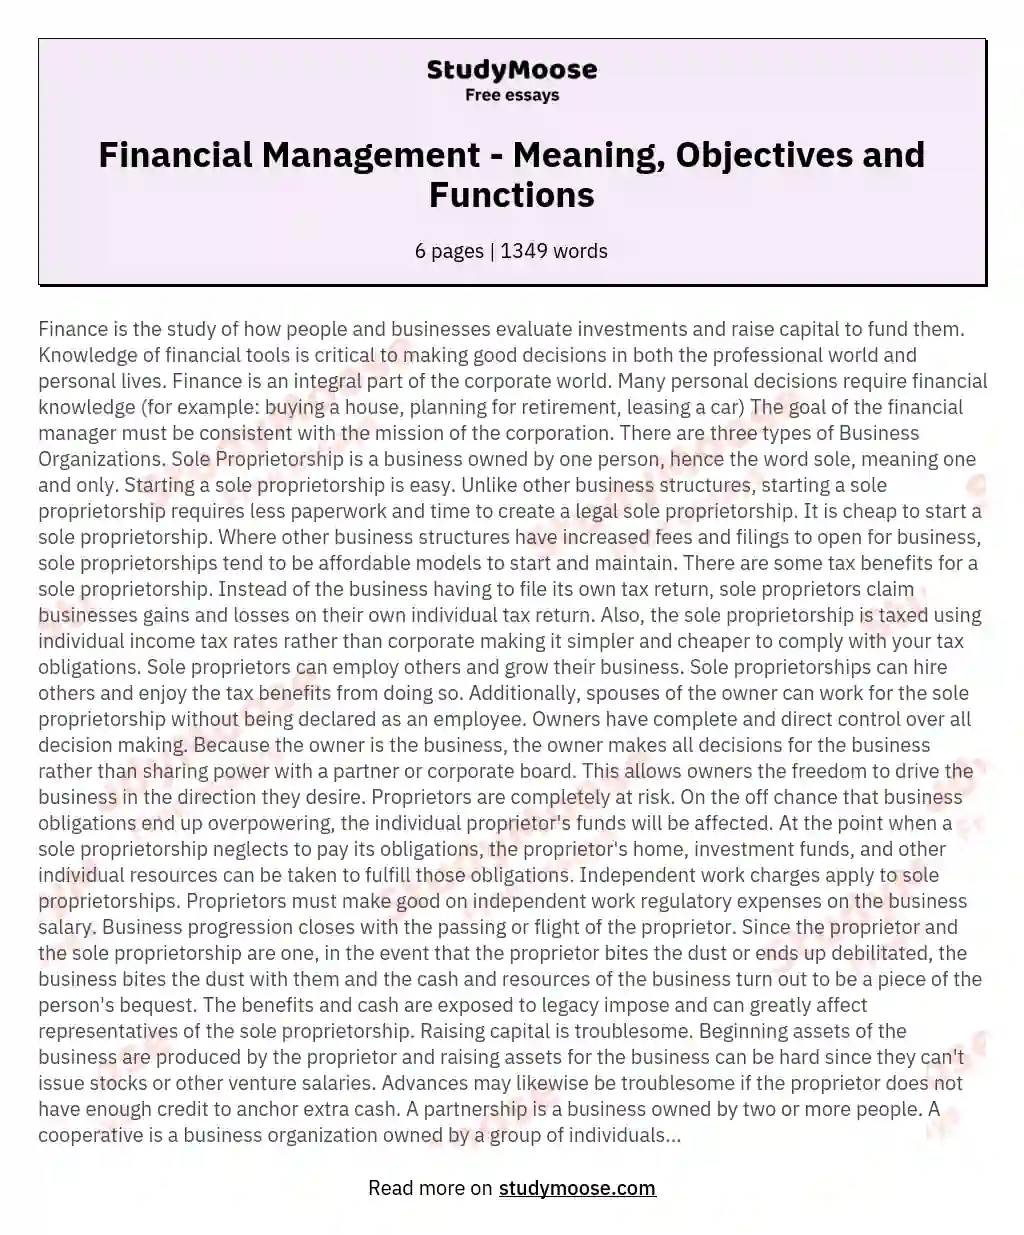 Financial Management - Meaning, Objectives and Functions essay